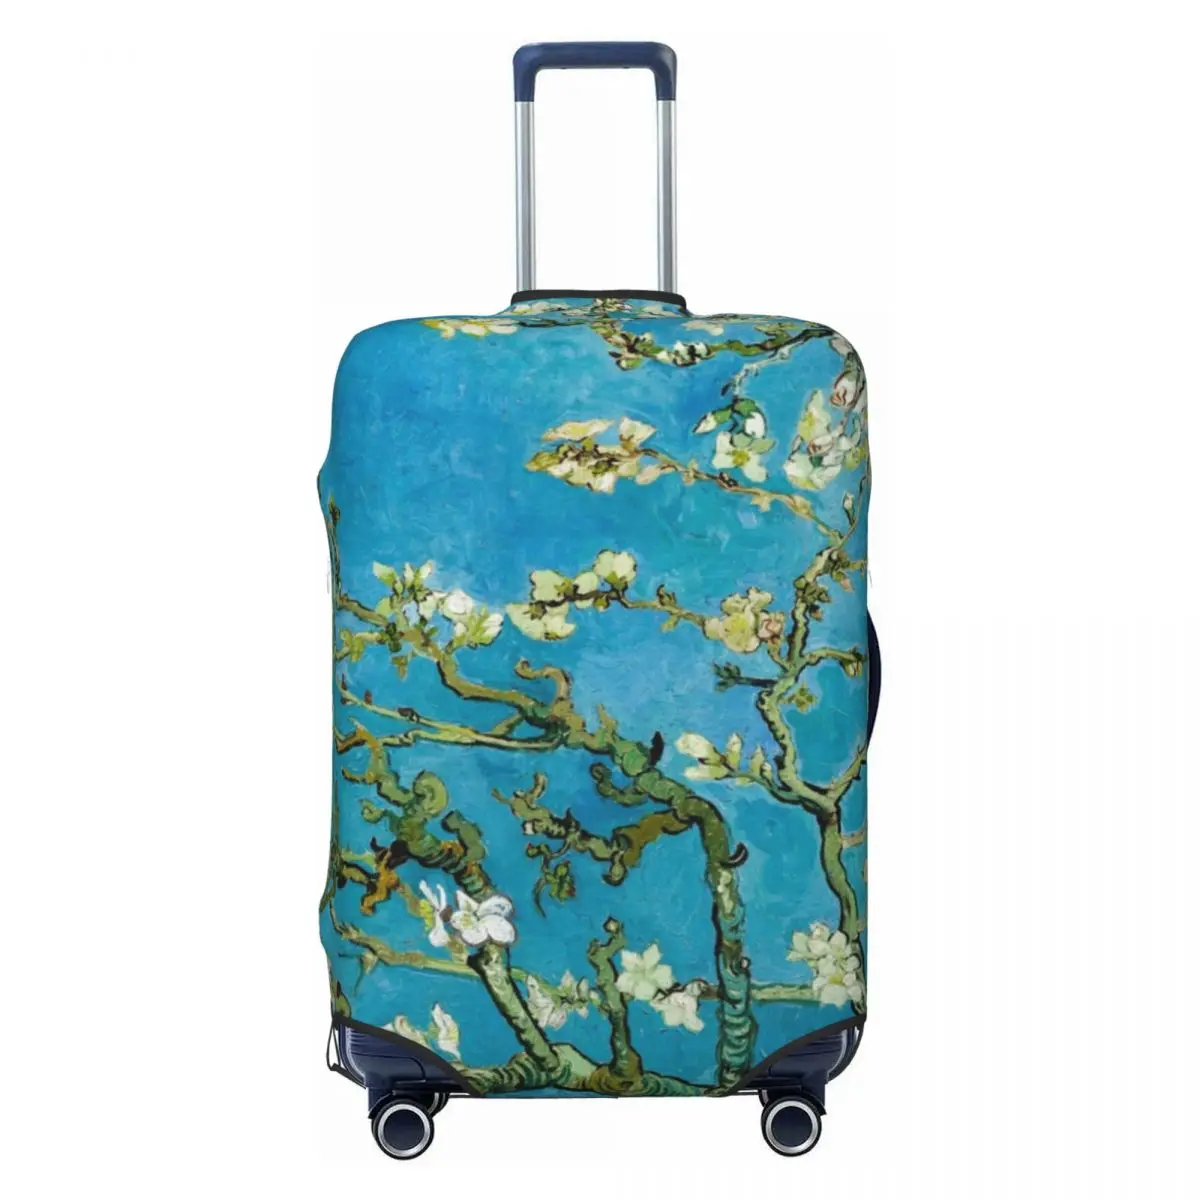 

Almond Blossom Suitcase Cover Vincent Van Gogh Travel Protector Holiday Useful Luggage Case